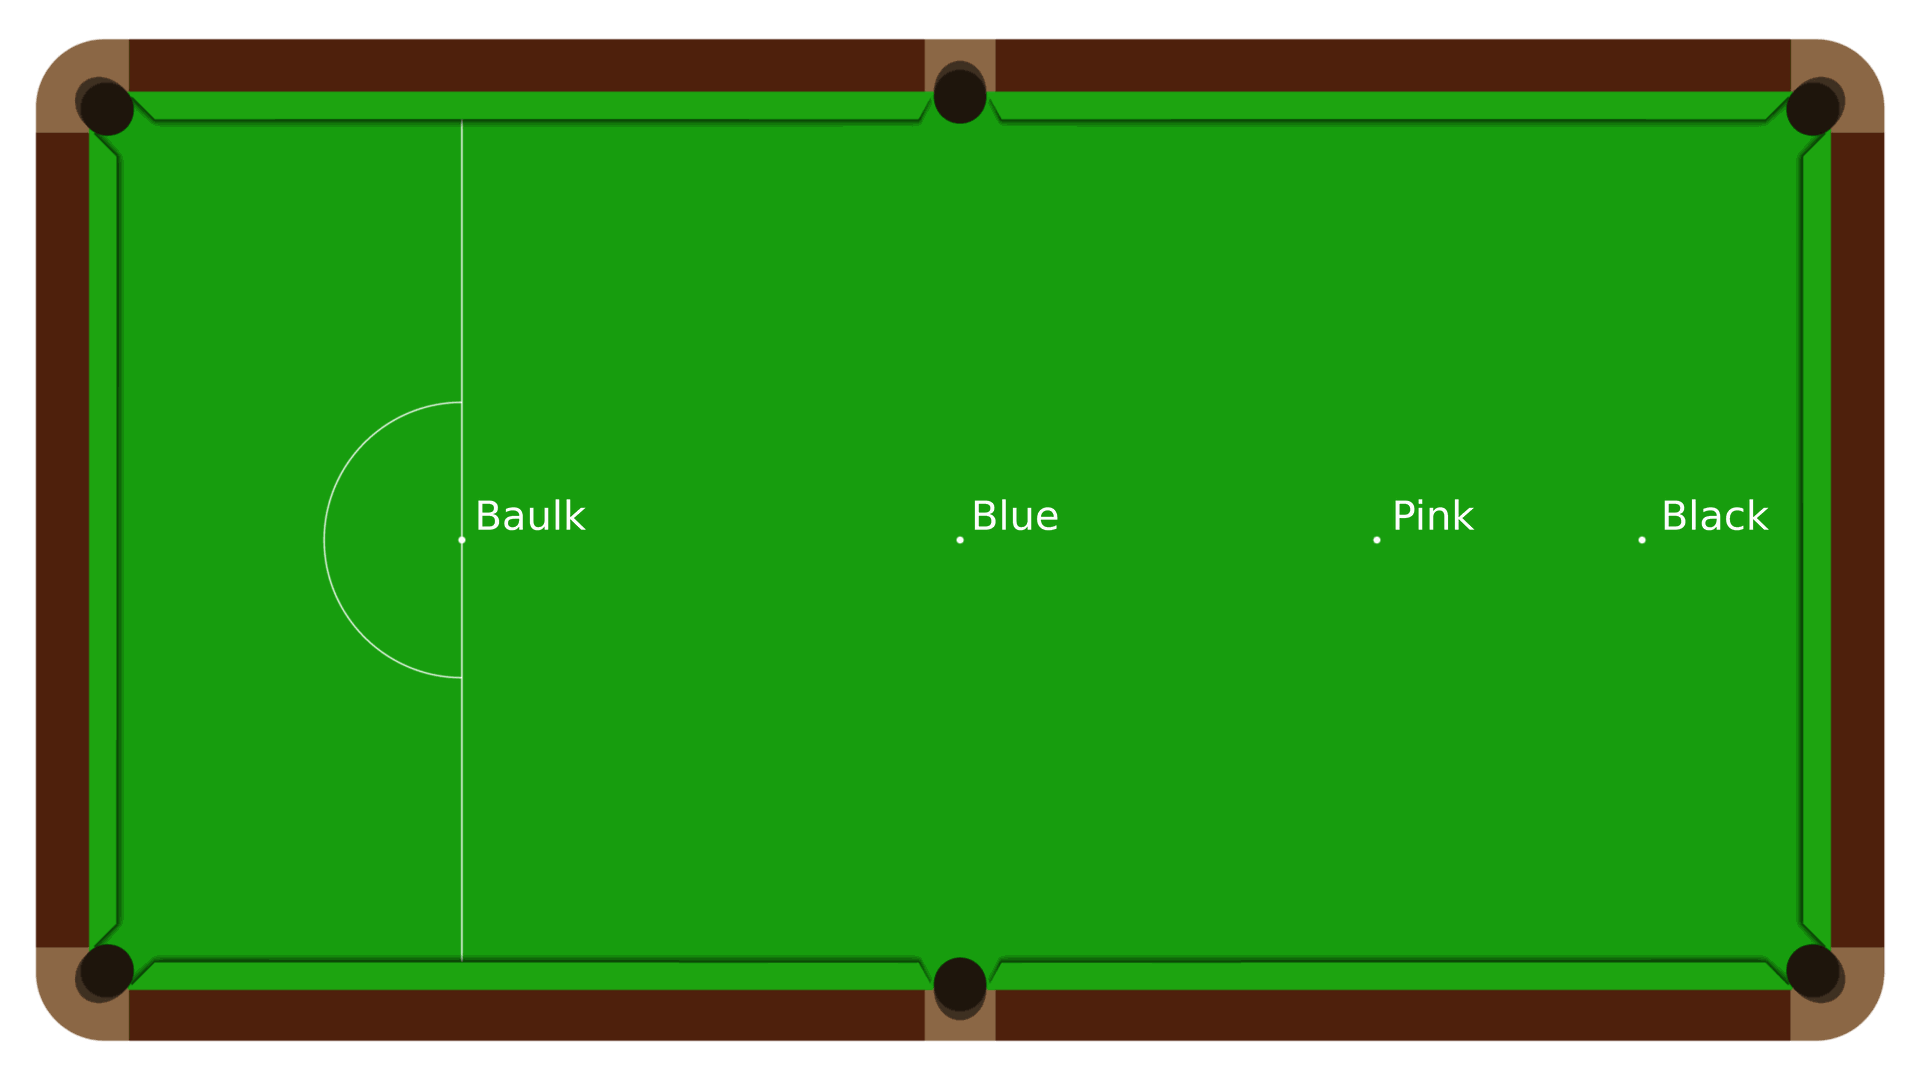 Image of a snooker table with naming of lines and points